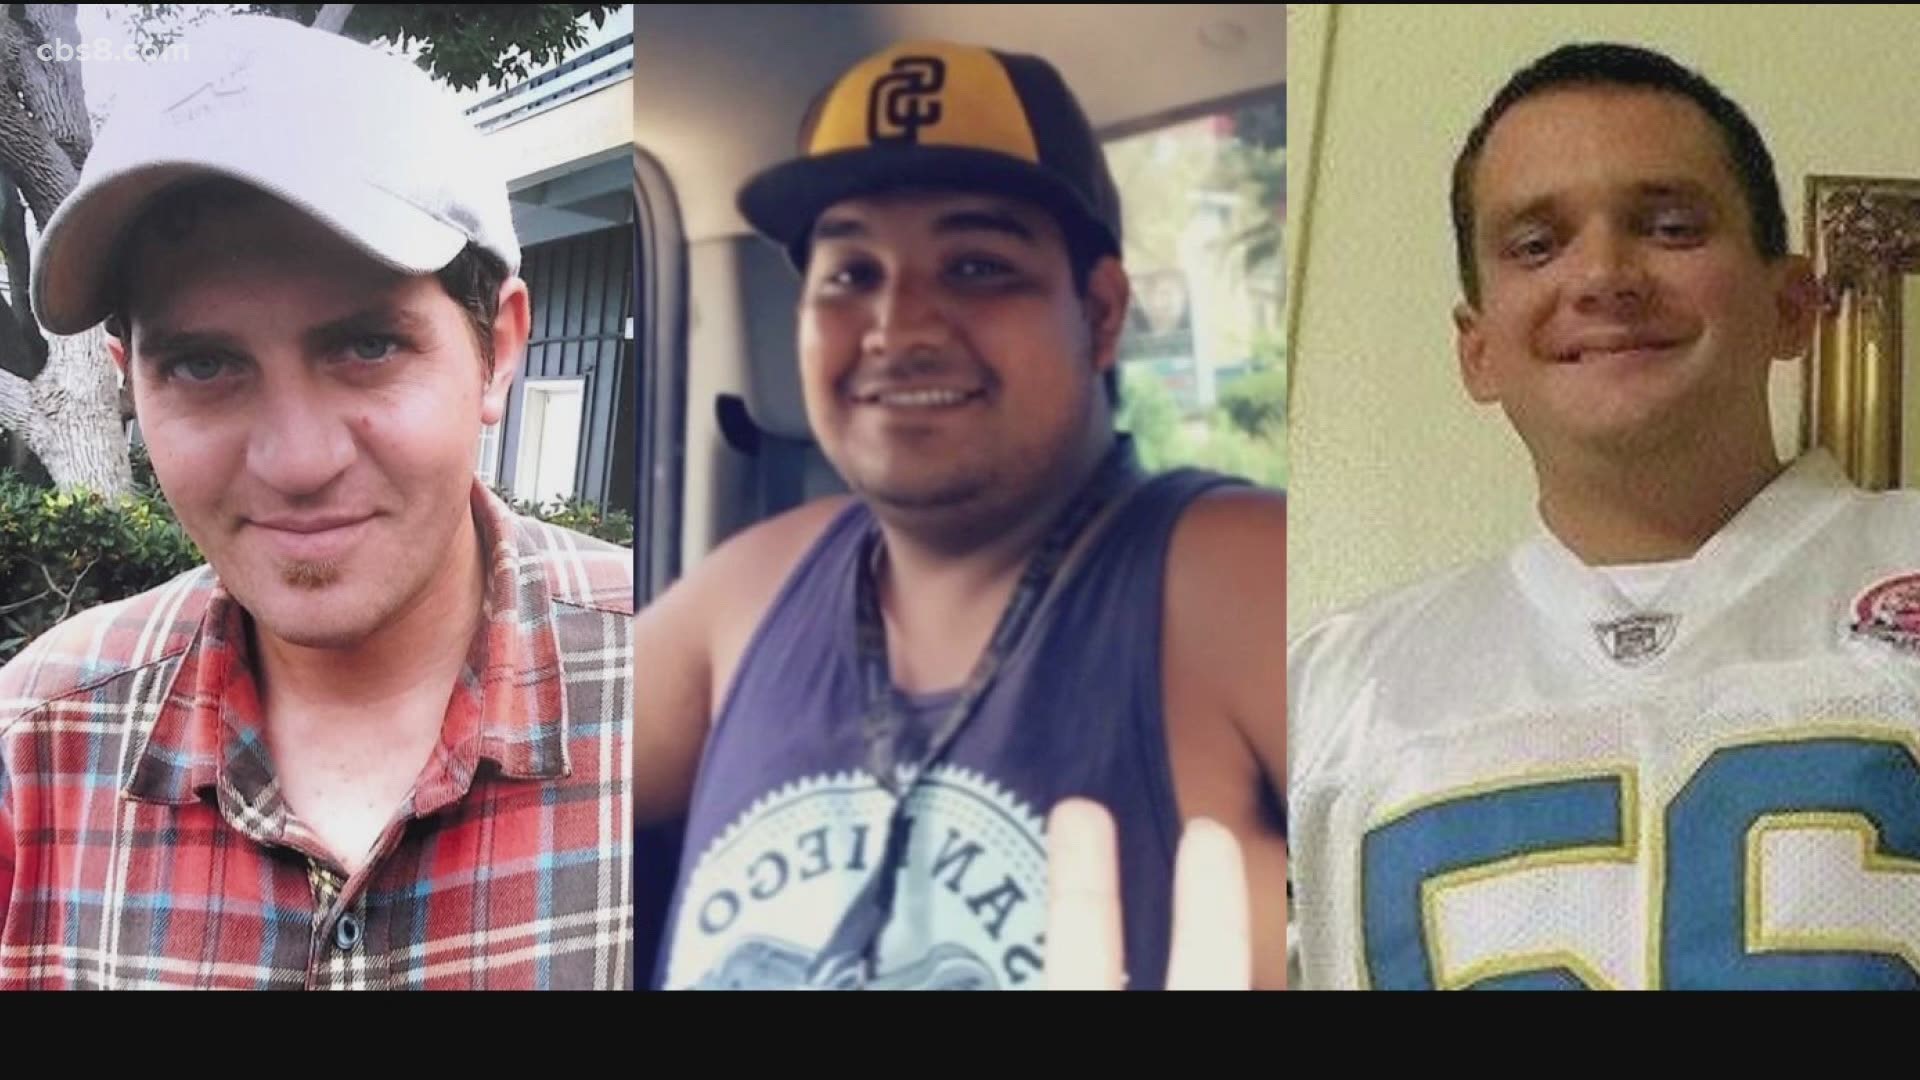 Some San Diego families have waited months to see video documenting the deaths of their loved ones.